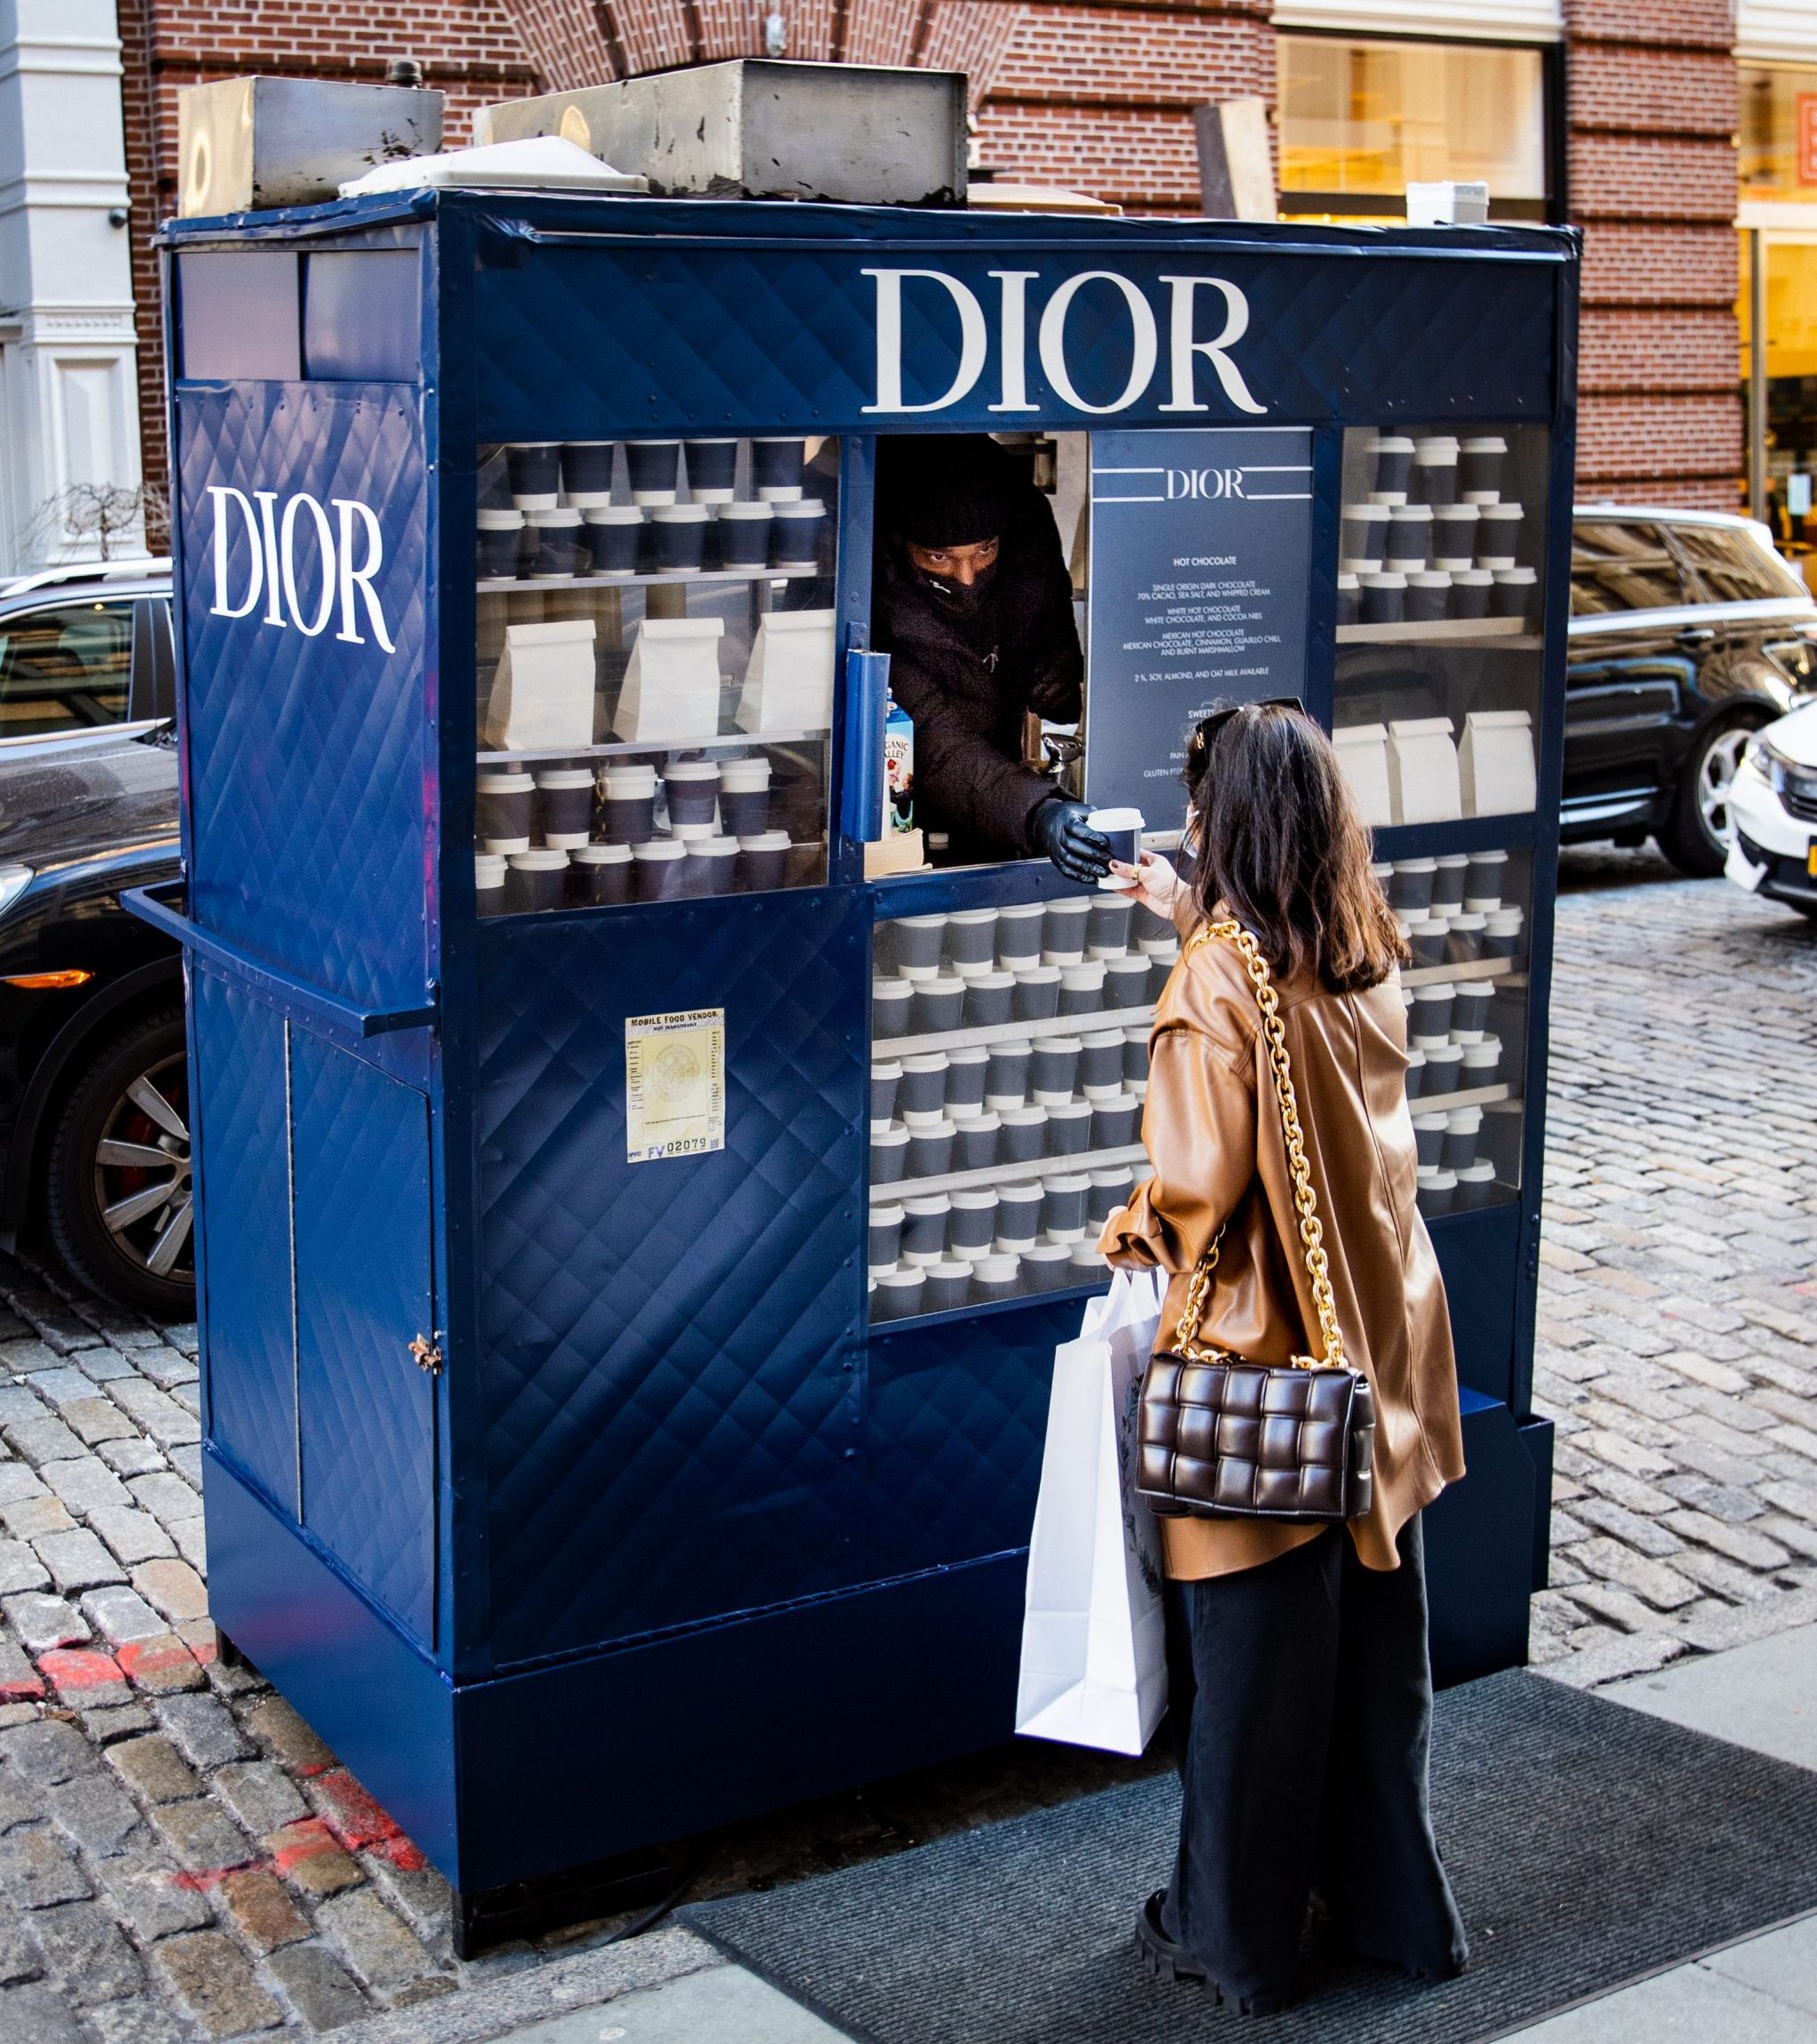 Dior Branded Coffee Cart